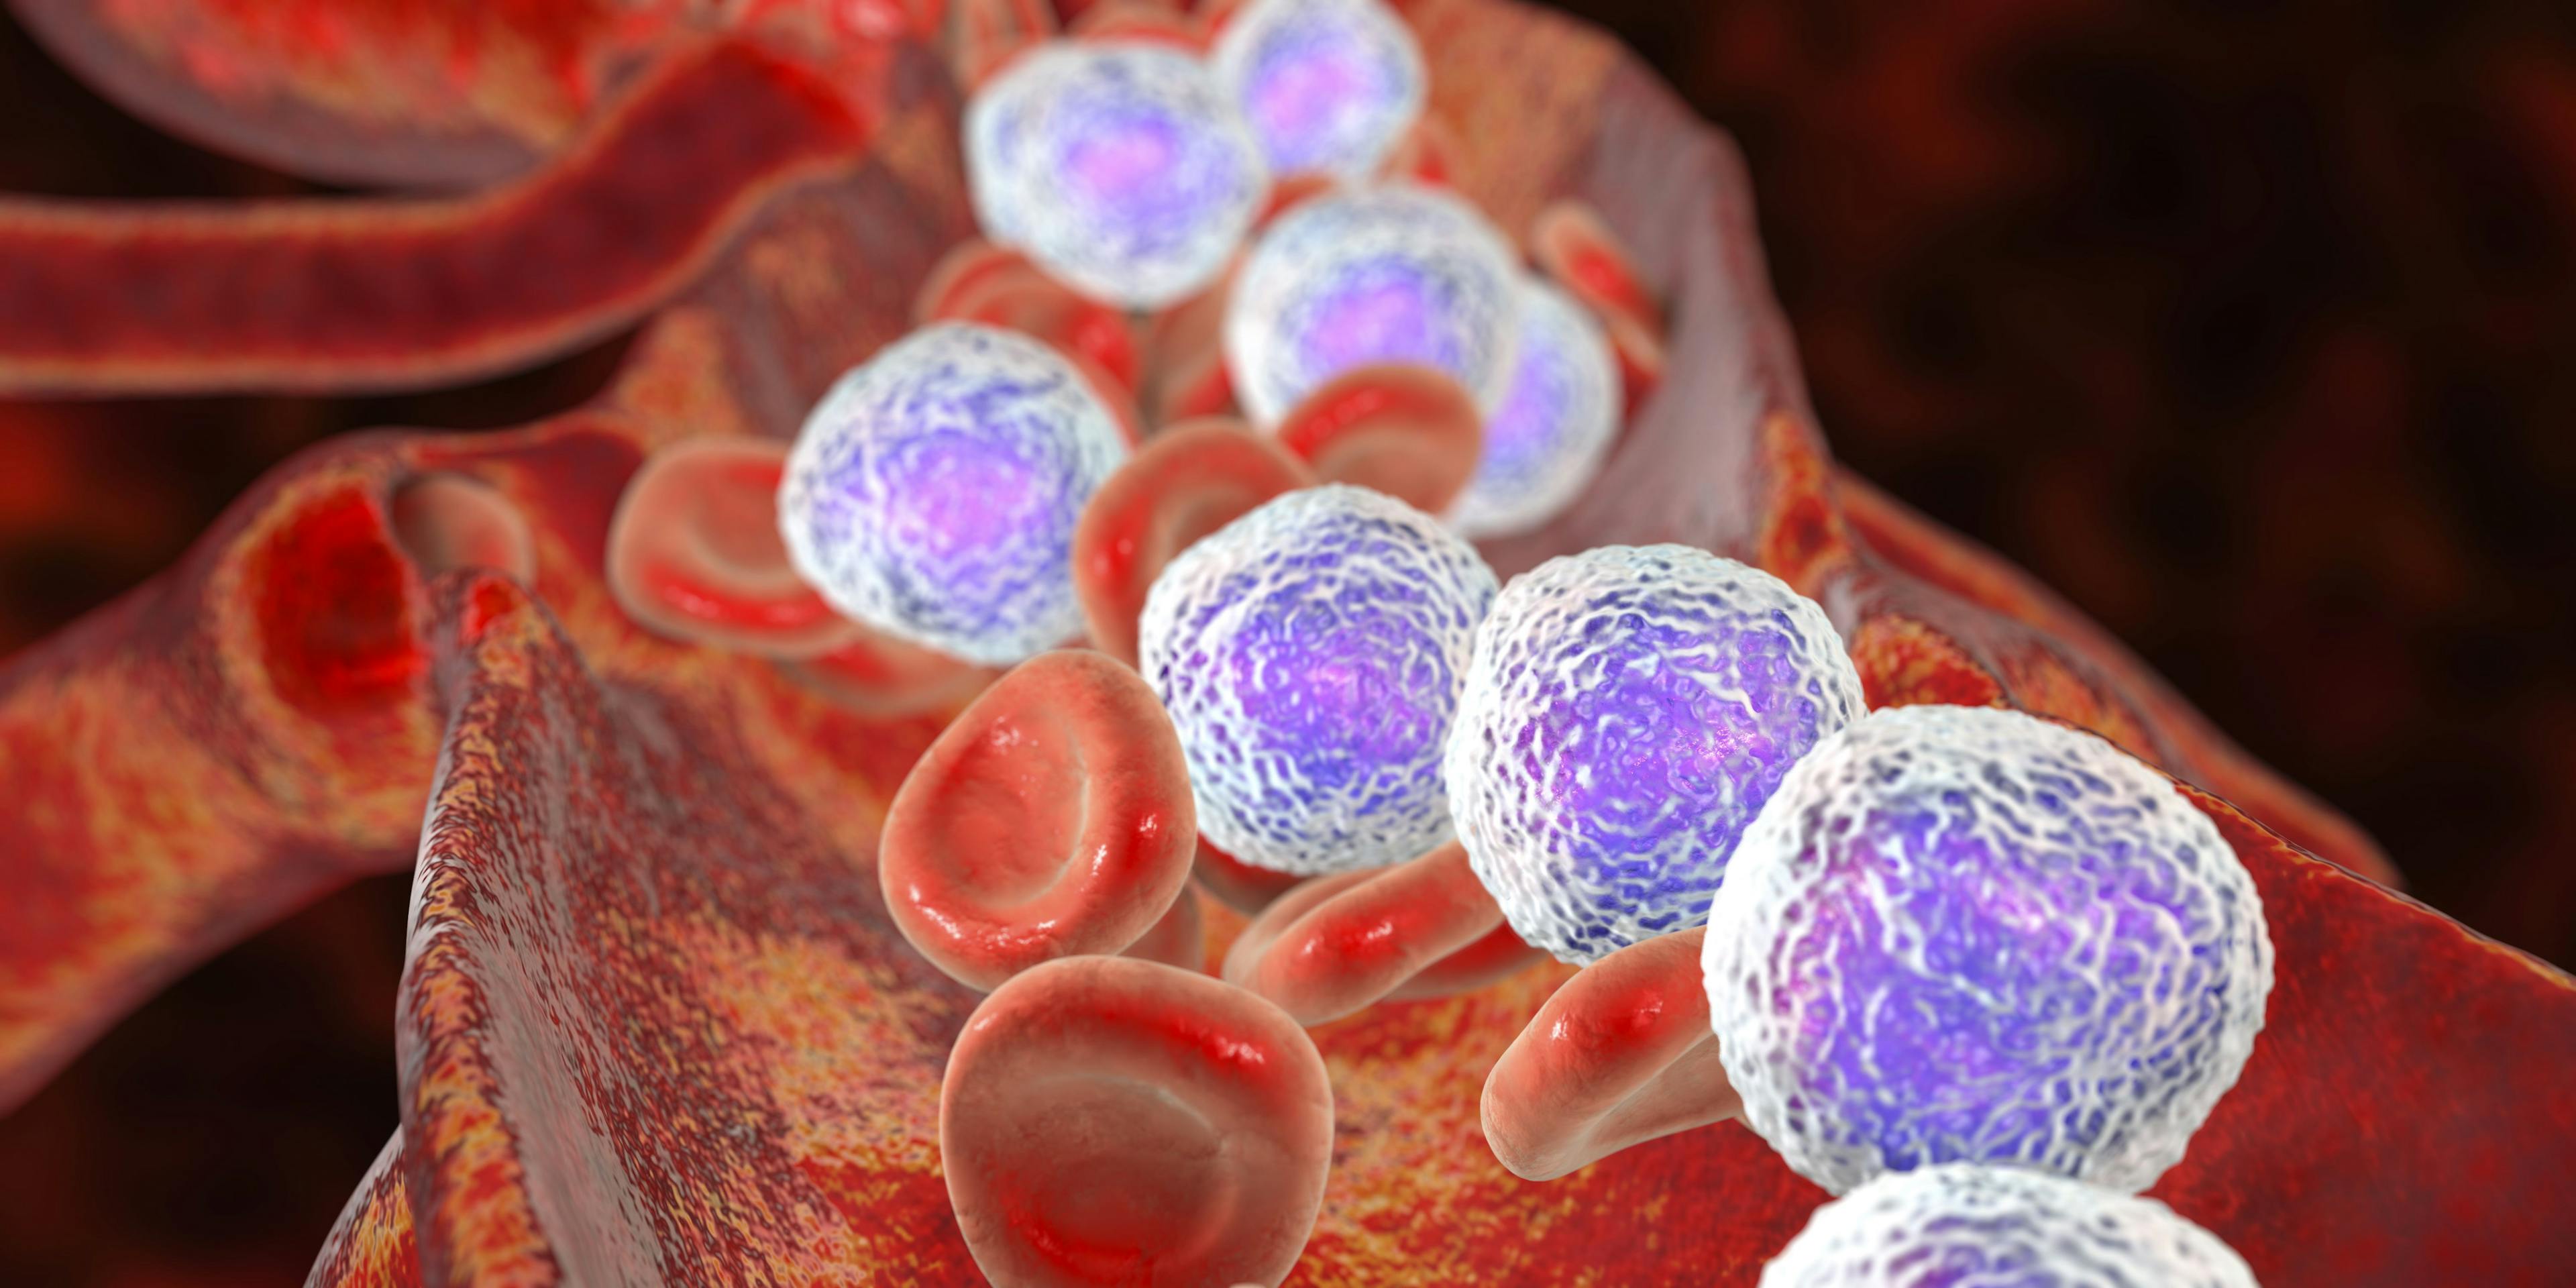 Findings from a retrospective study demonstrate the feasibility of using brexucabtagene autoleucel to treat patients with relapsed/refractory B-cell acute lymphoblastic leukemia with central nervous system involvement.